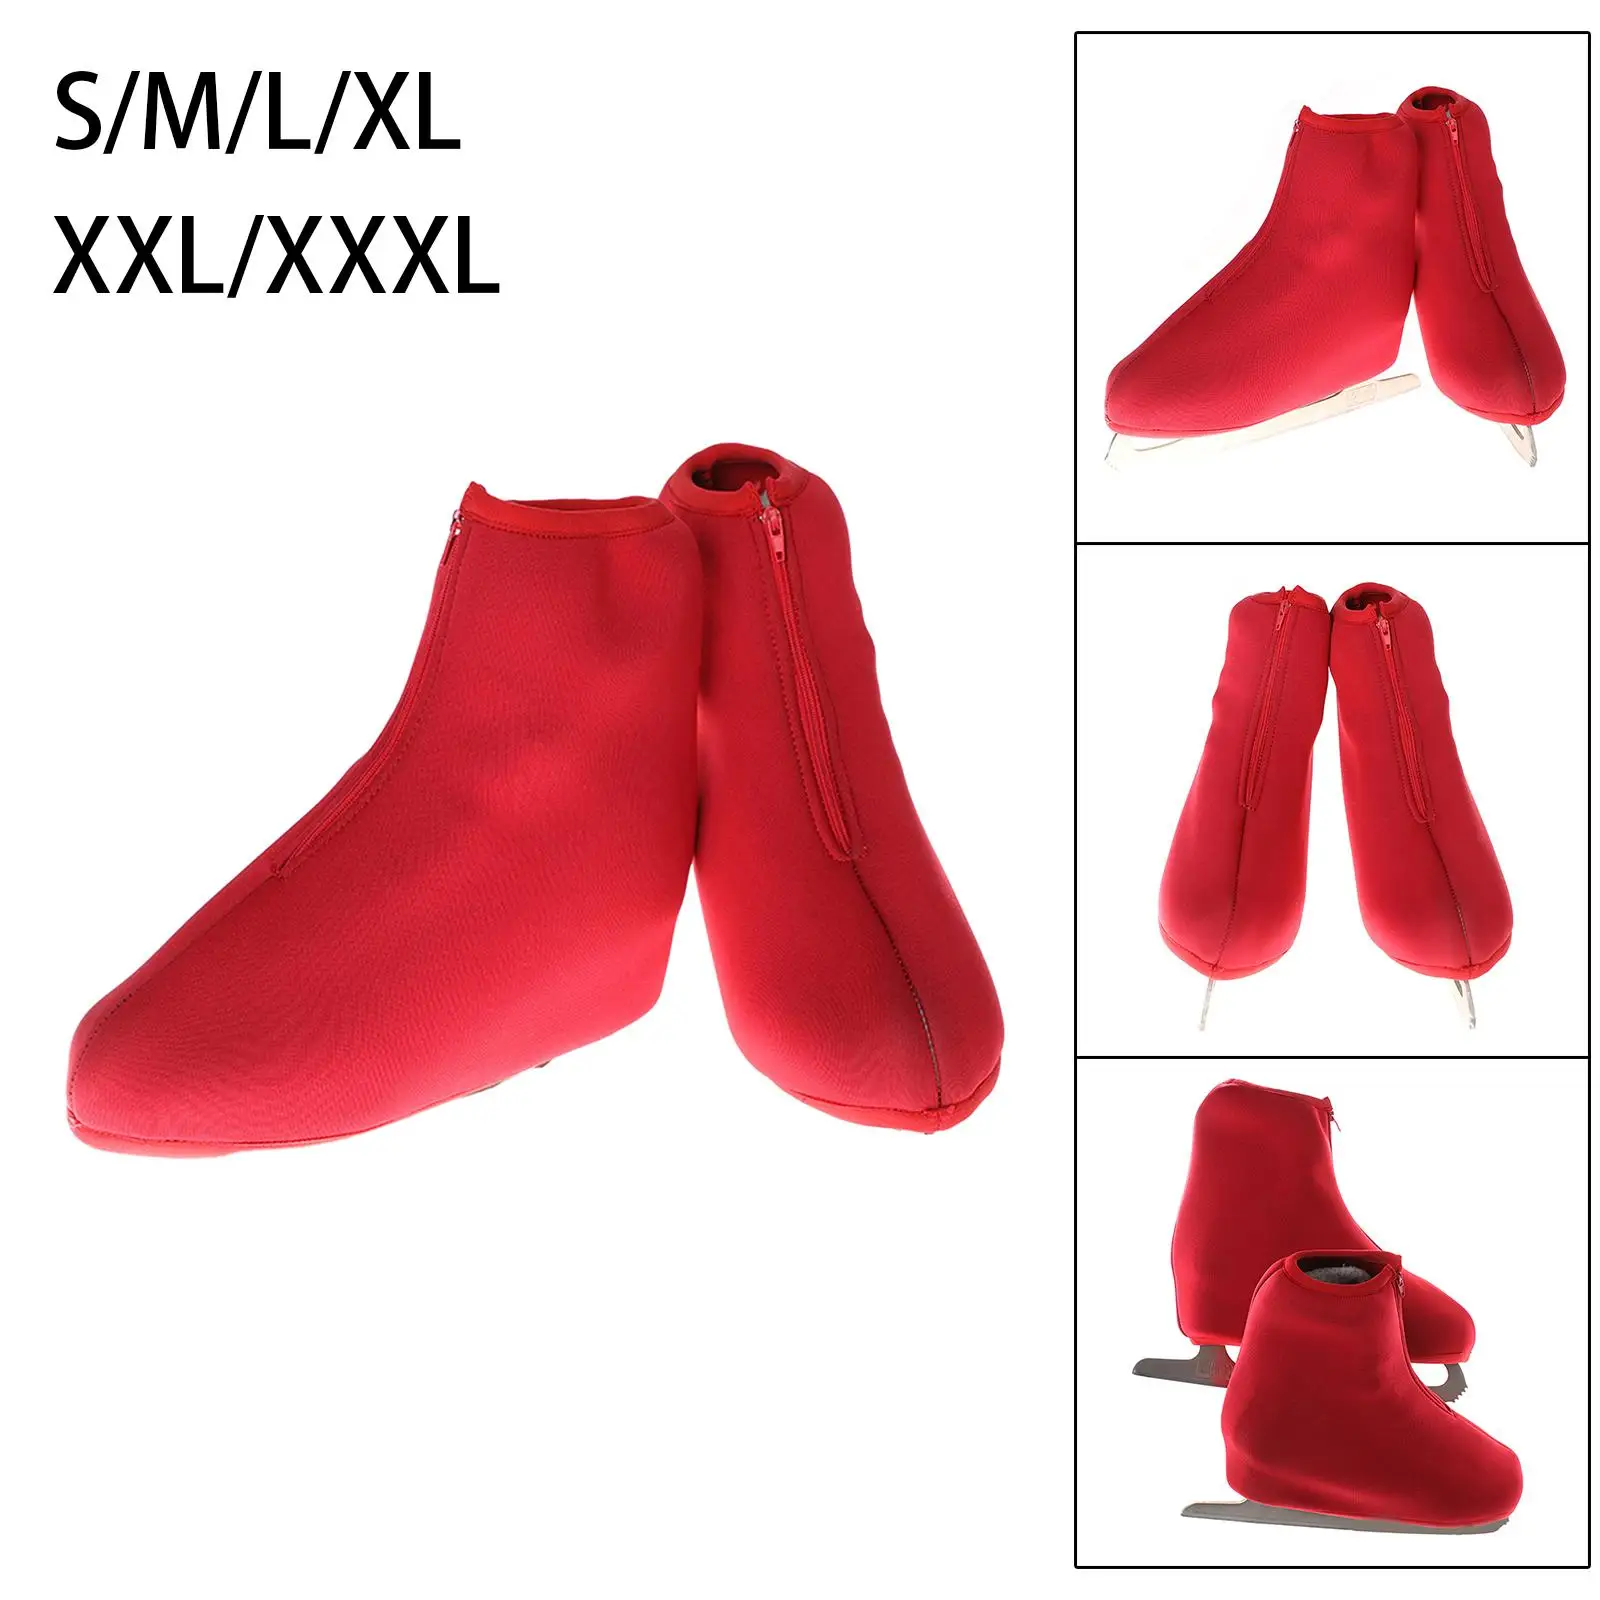 1 Pair Ice Skate Boot Covers Durable Figure Skating Boot Covers Protective Men Women for Roller Skates Ice Skating Figure Skates